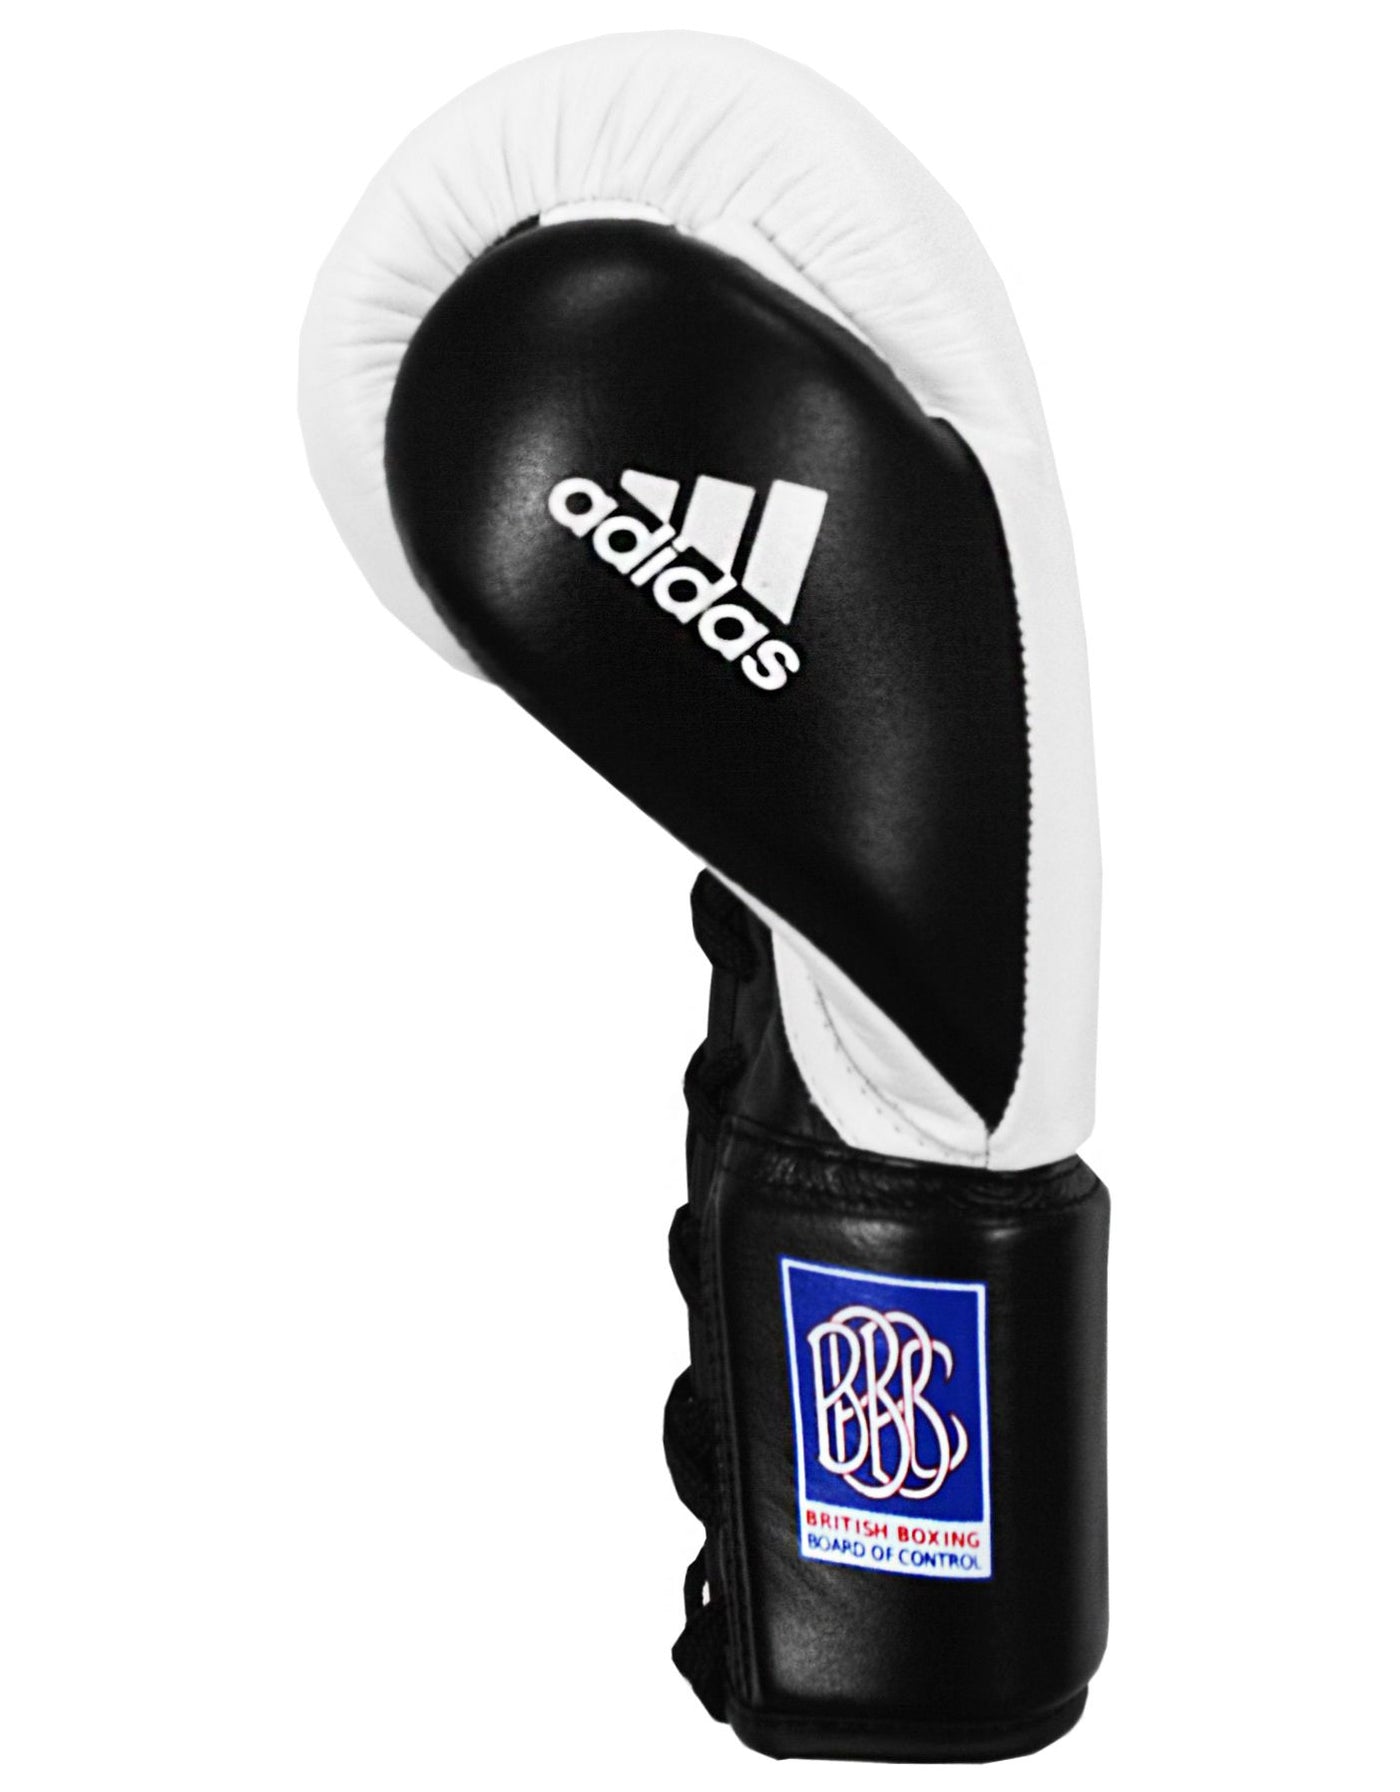 ADIDAS HYBRID 400 BBBC APPROVED LACE BOXING GLOVES